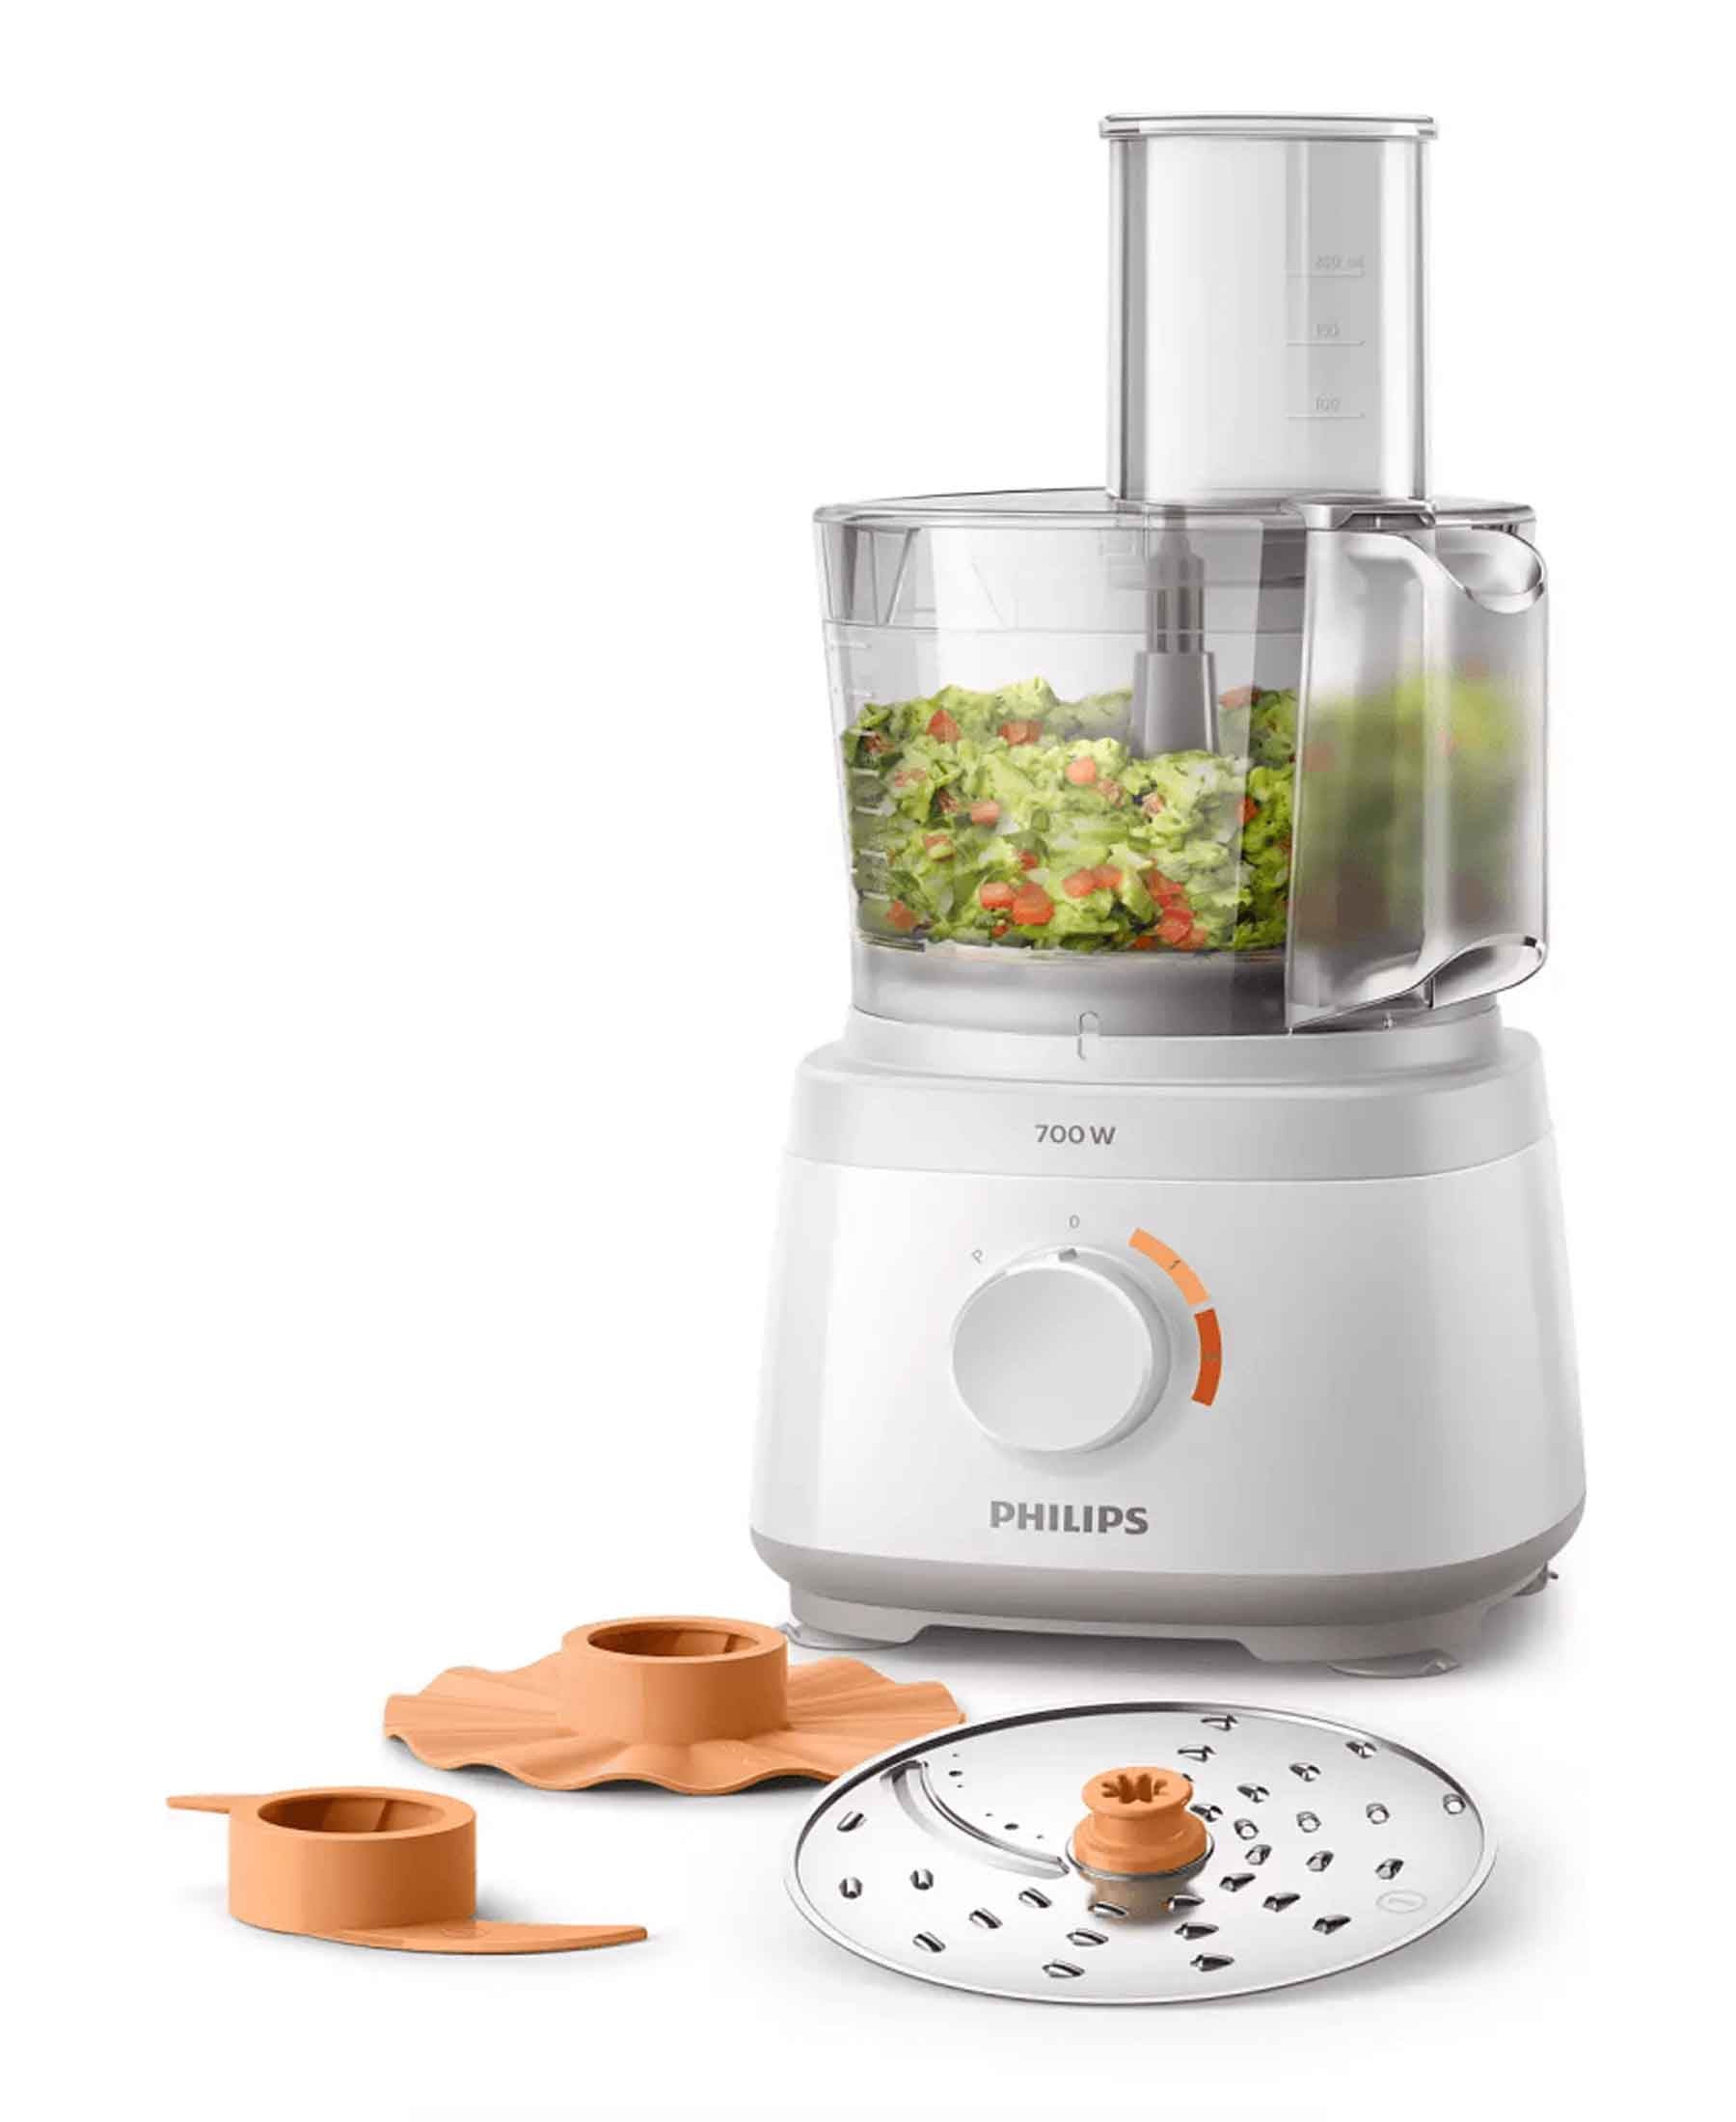 Philips Daily Collection Compact Food Processor - White